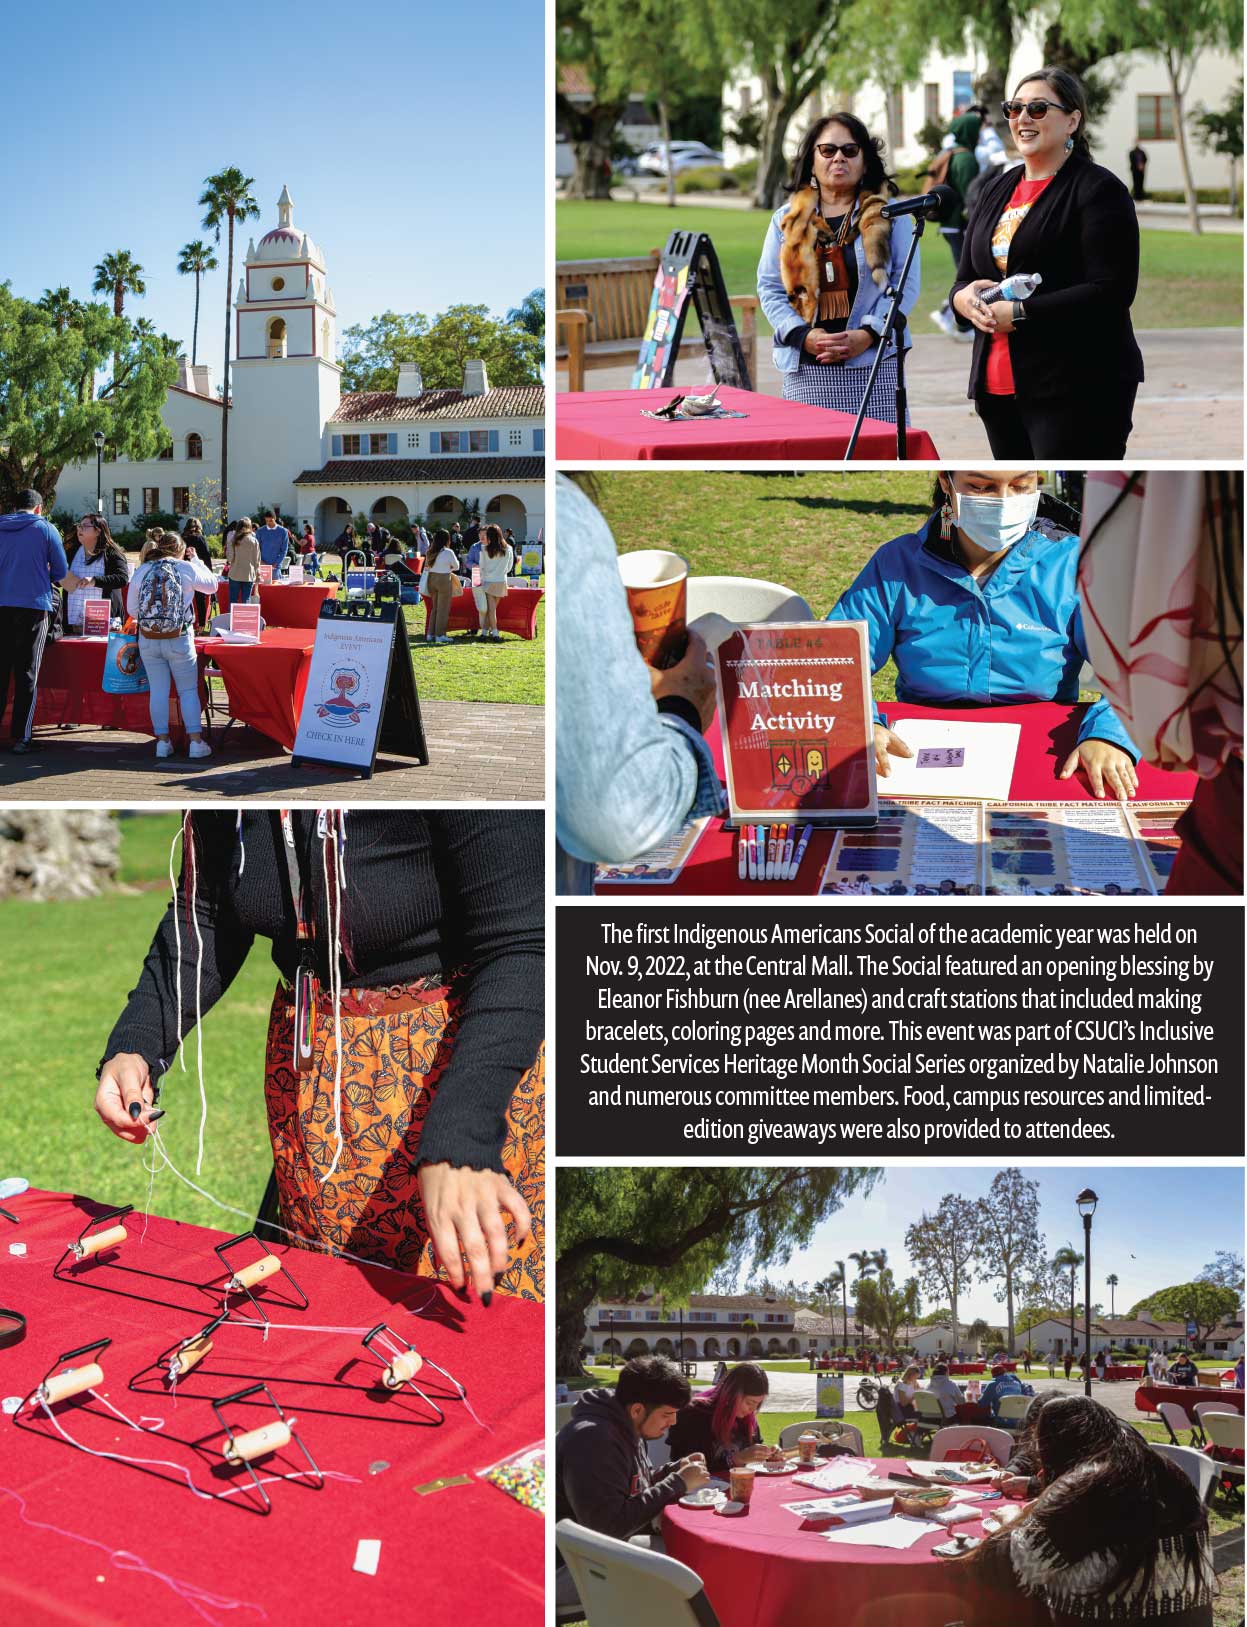 The first Indigenous Americans Social of the academic year was held on  Nov. 9, 2022, at the Central Mall. The Social featured an opening blessing by Eleanor Fishburn (nee Arellanes) and craft stations that included making bracelets, coloring pages and more. 